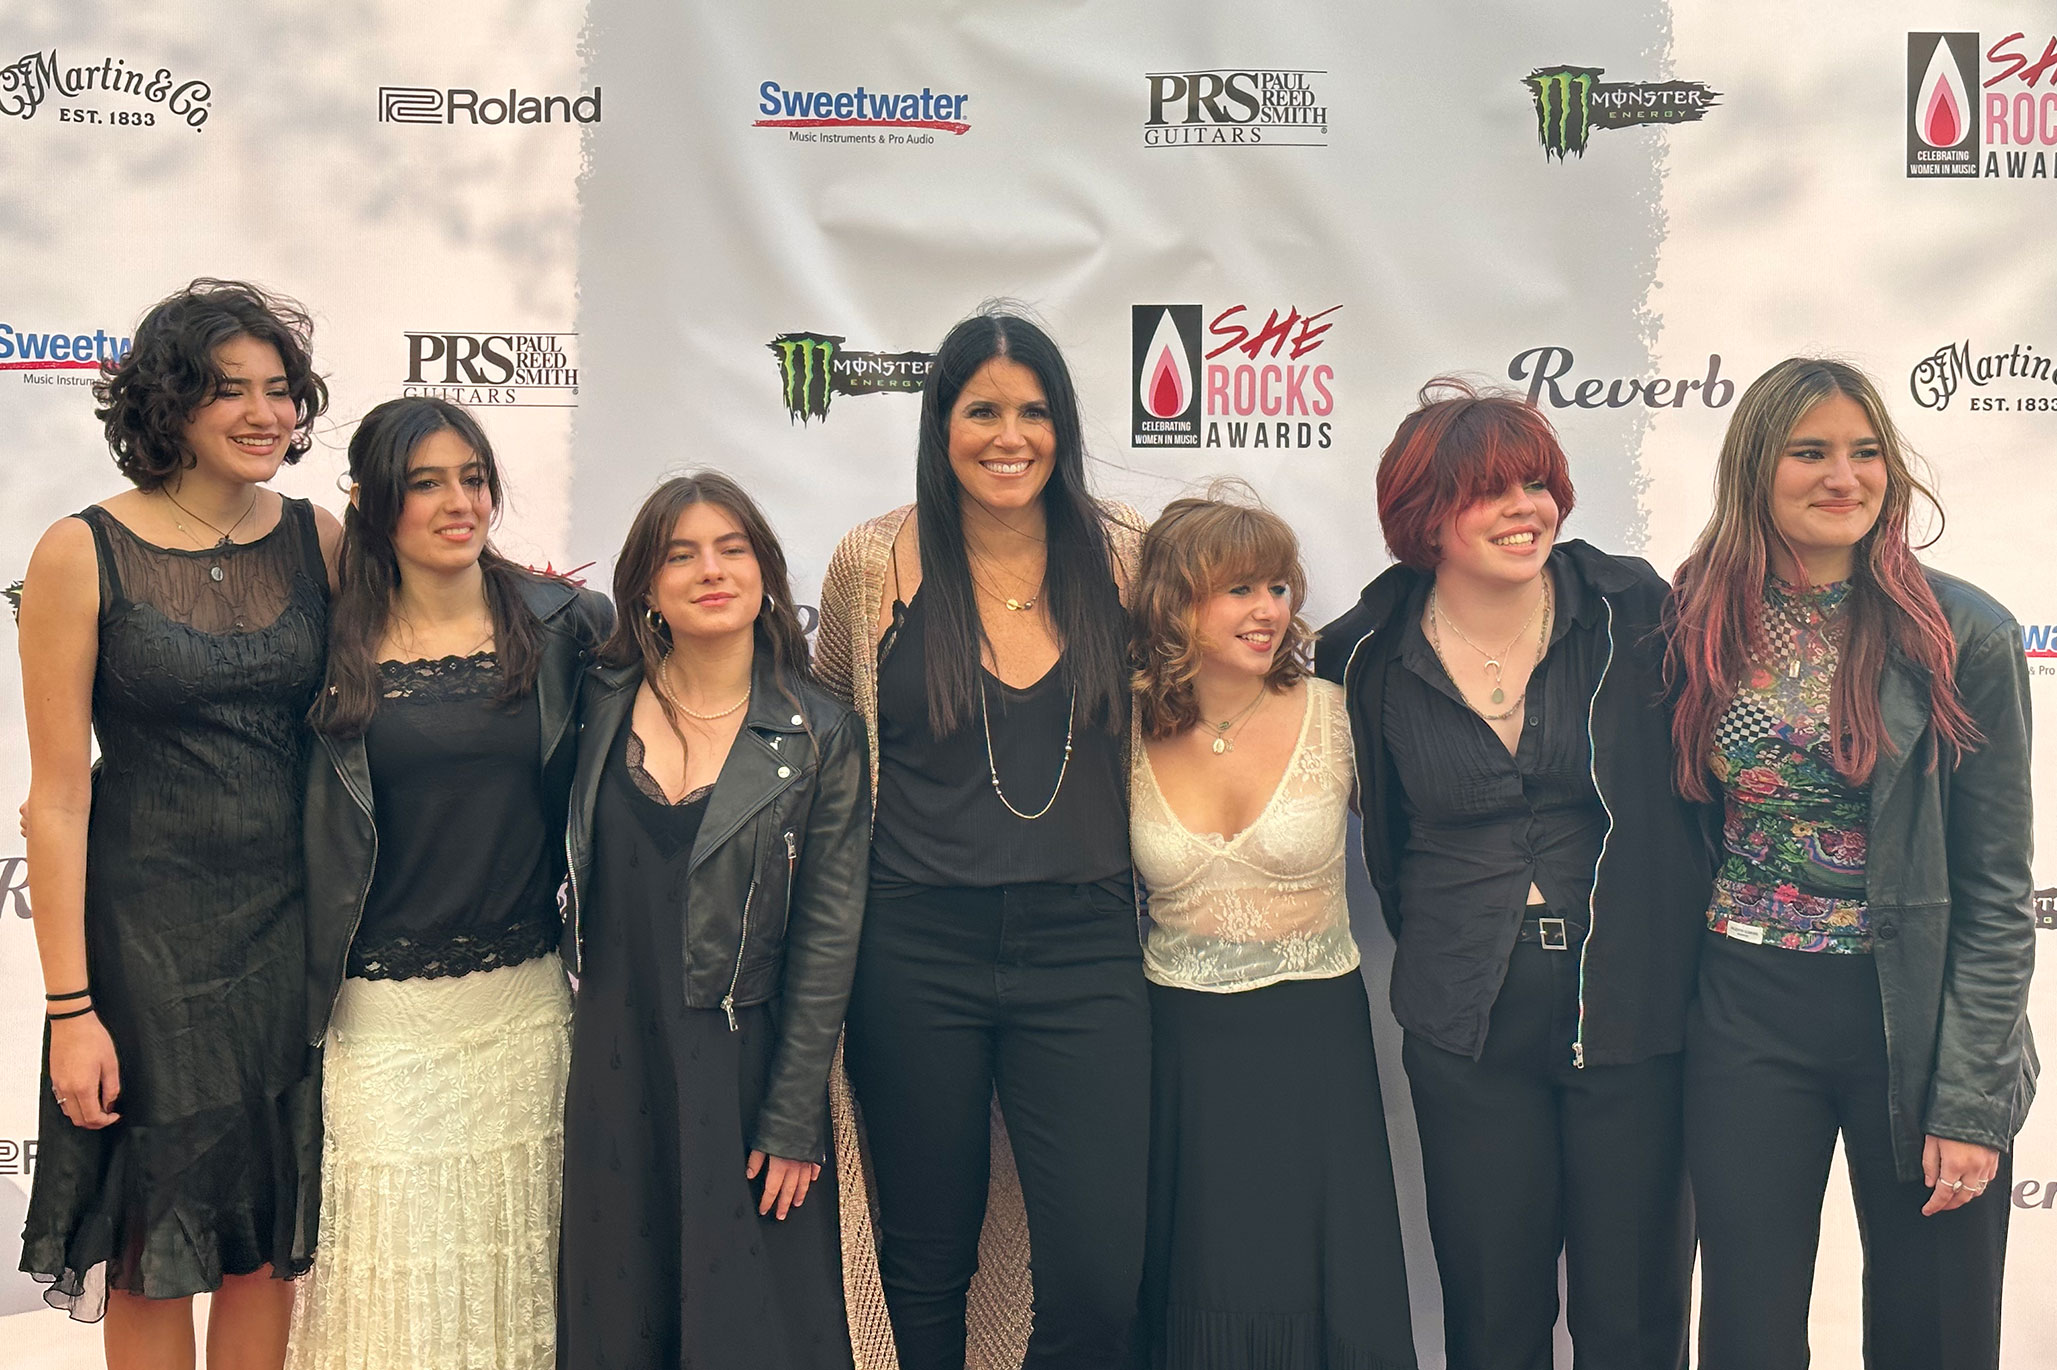 School of Rock COO Stacey Ryan with students from School of Rock West LA on the 2023 She Rocks Awards red carpet